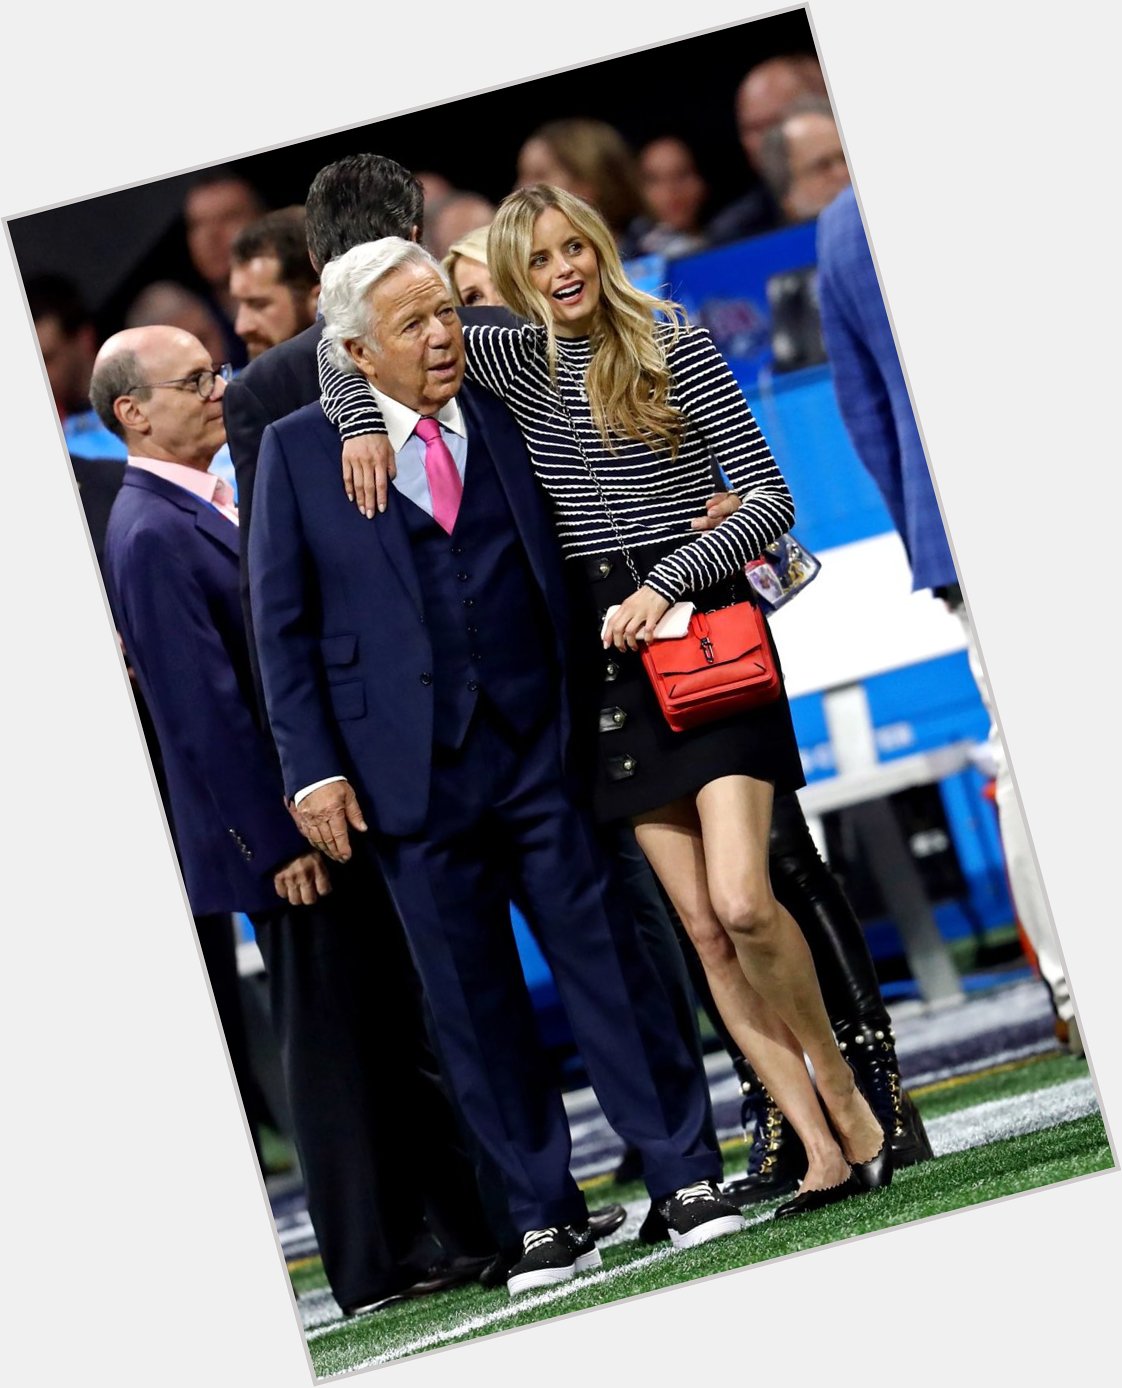 Happy birthday to the king Robert Kraft. The worlds a better place with him in it 